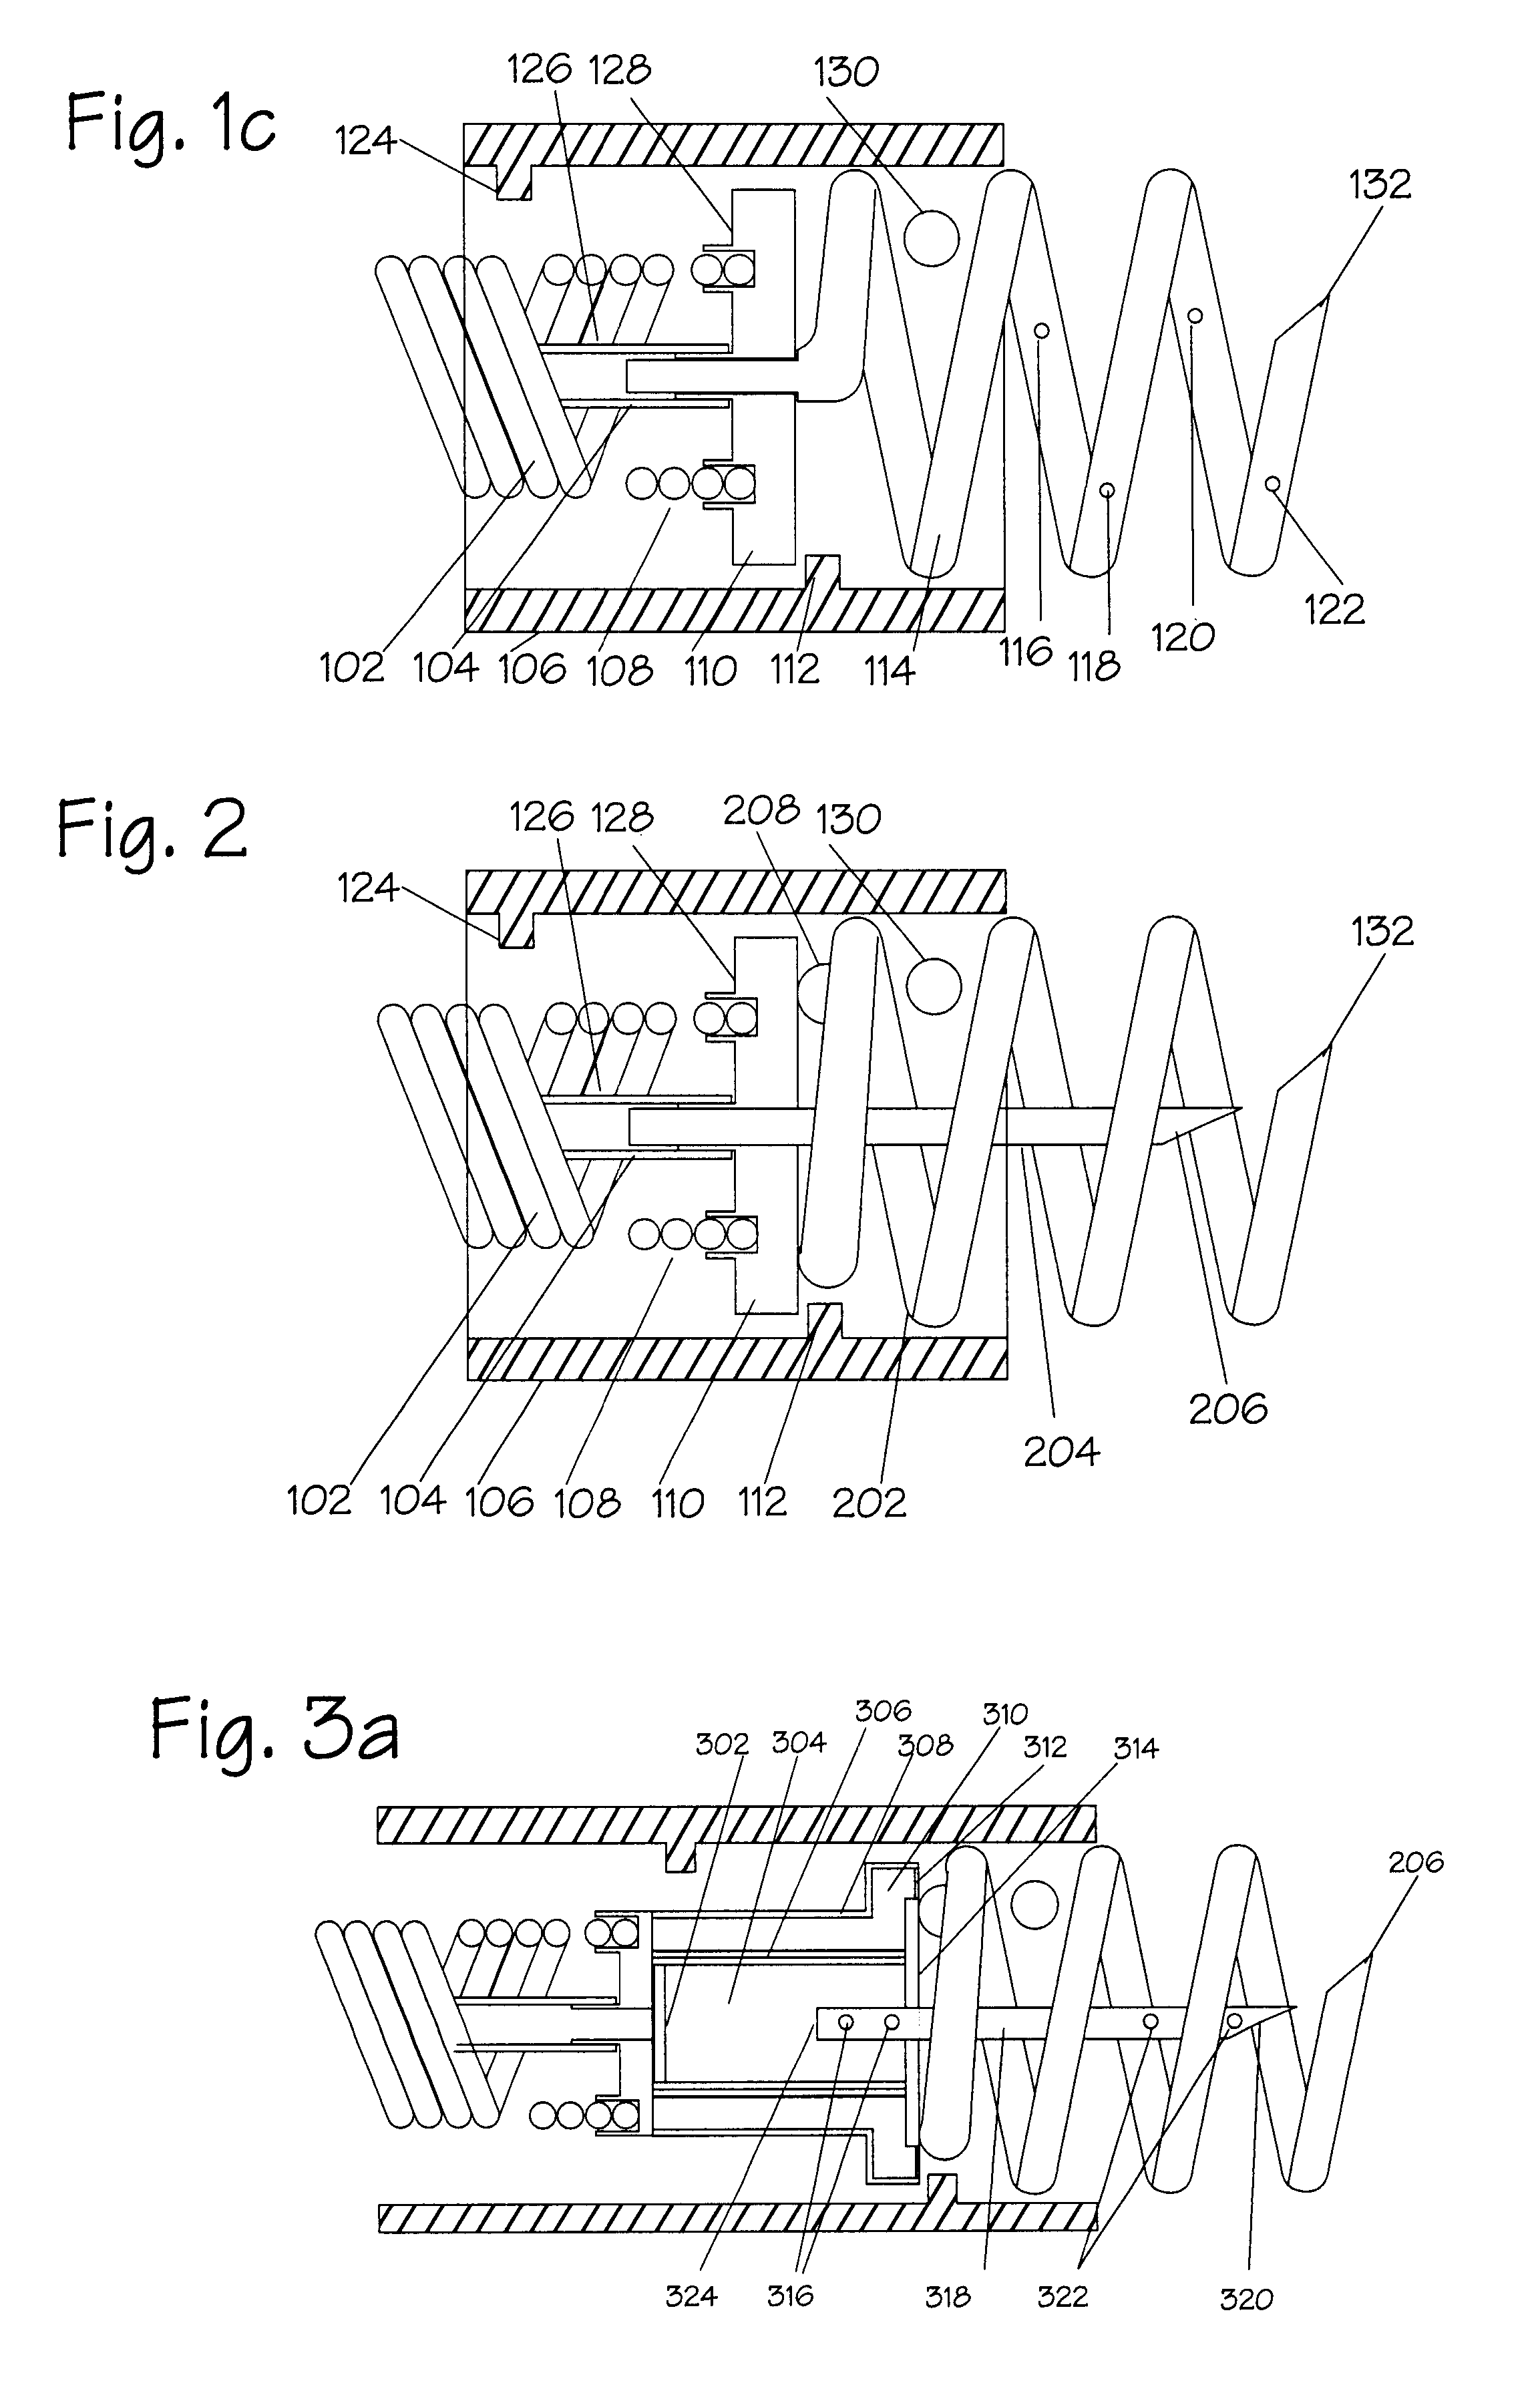 Drug delivery catheters that attach to tissue and methods for their use